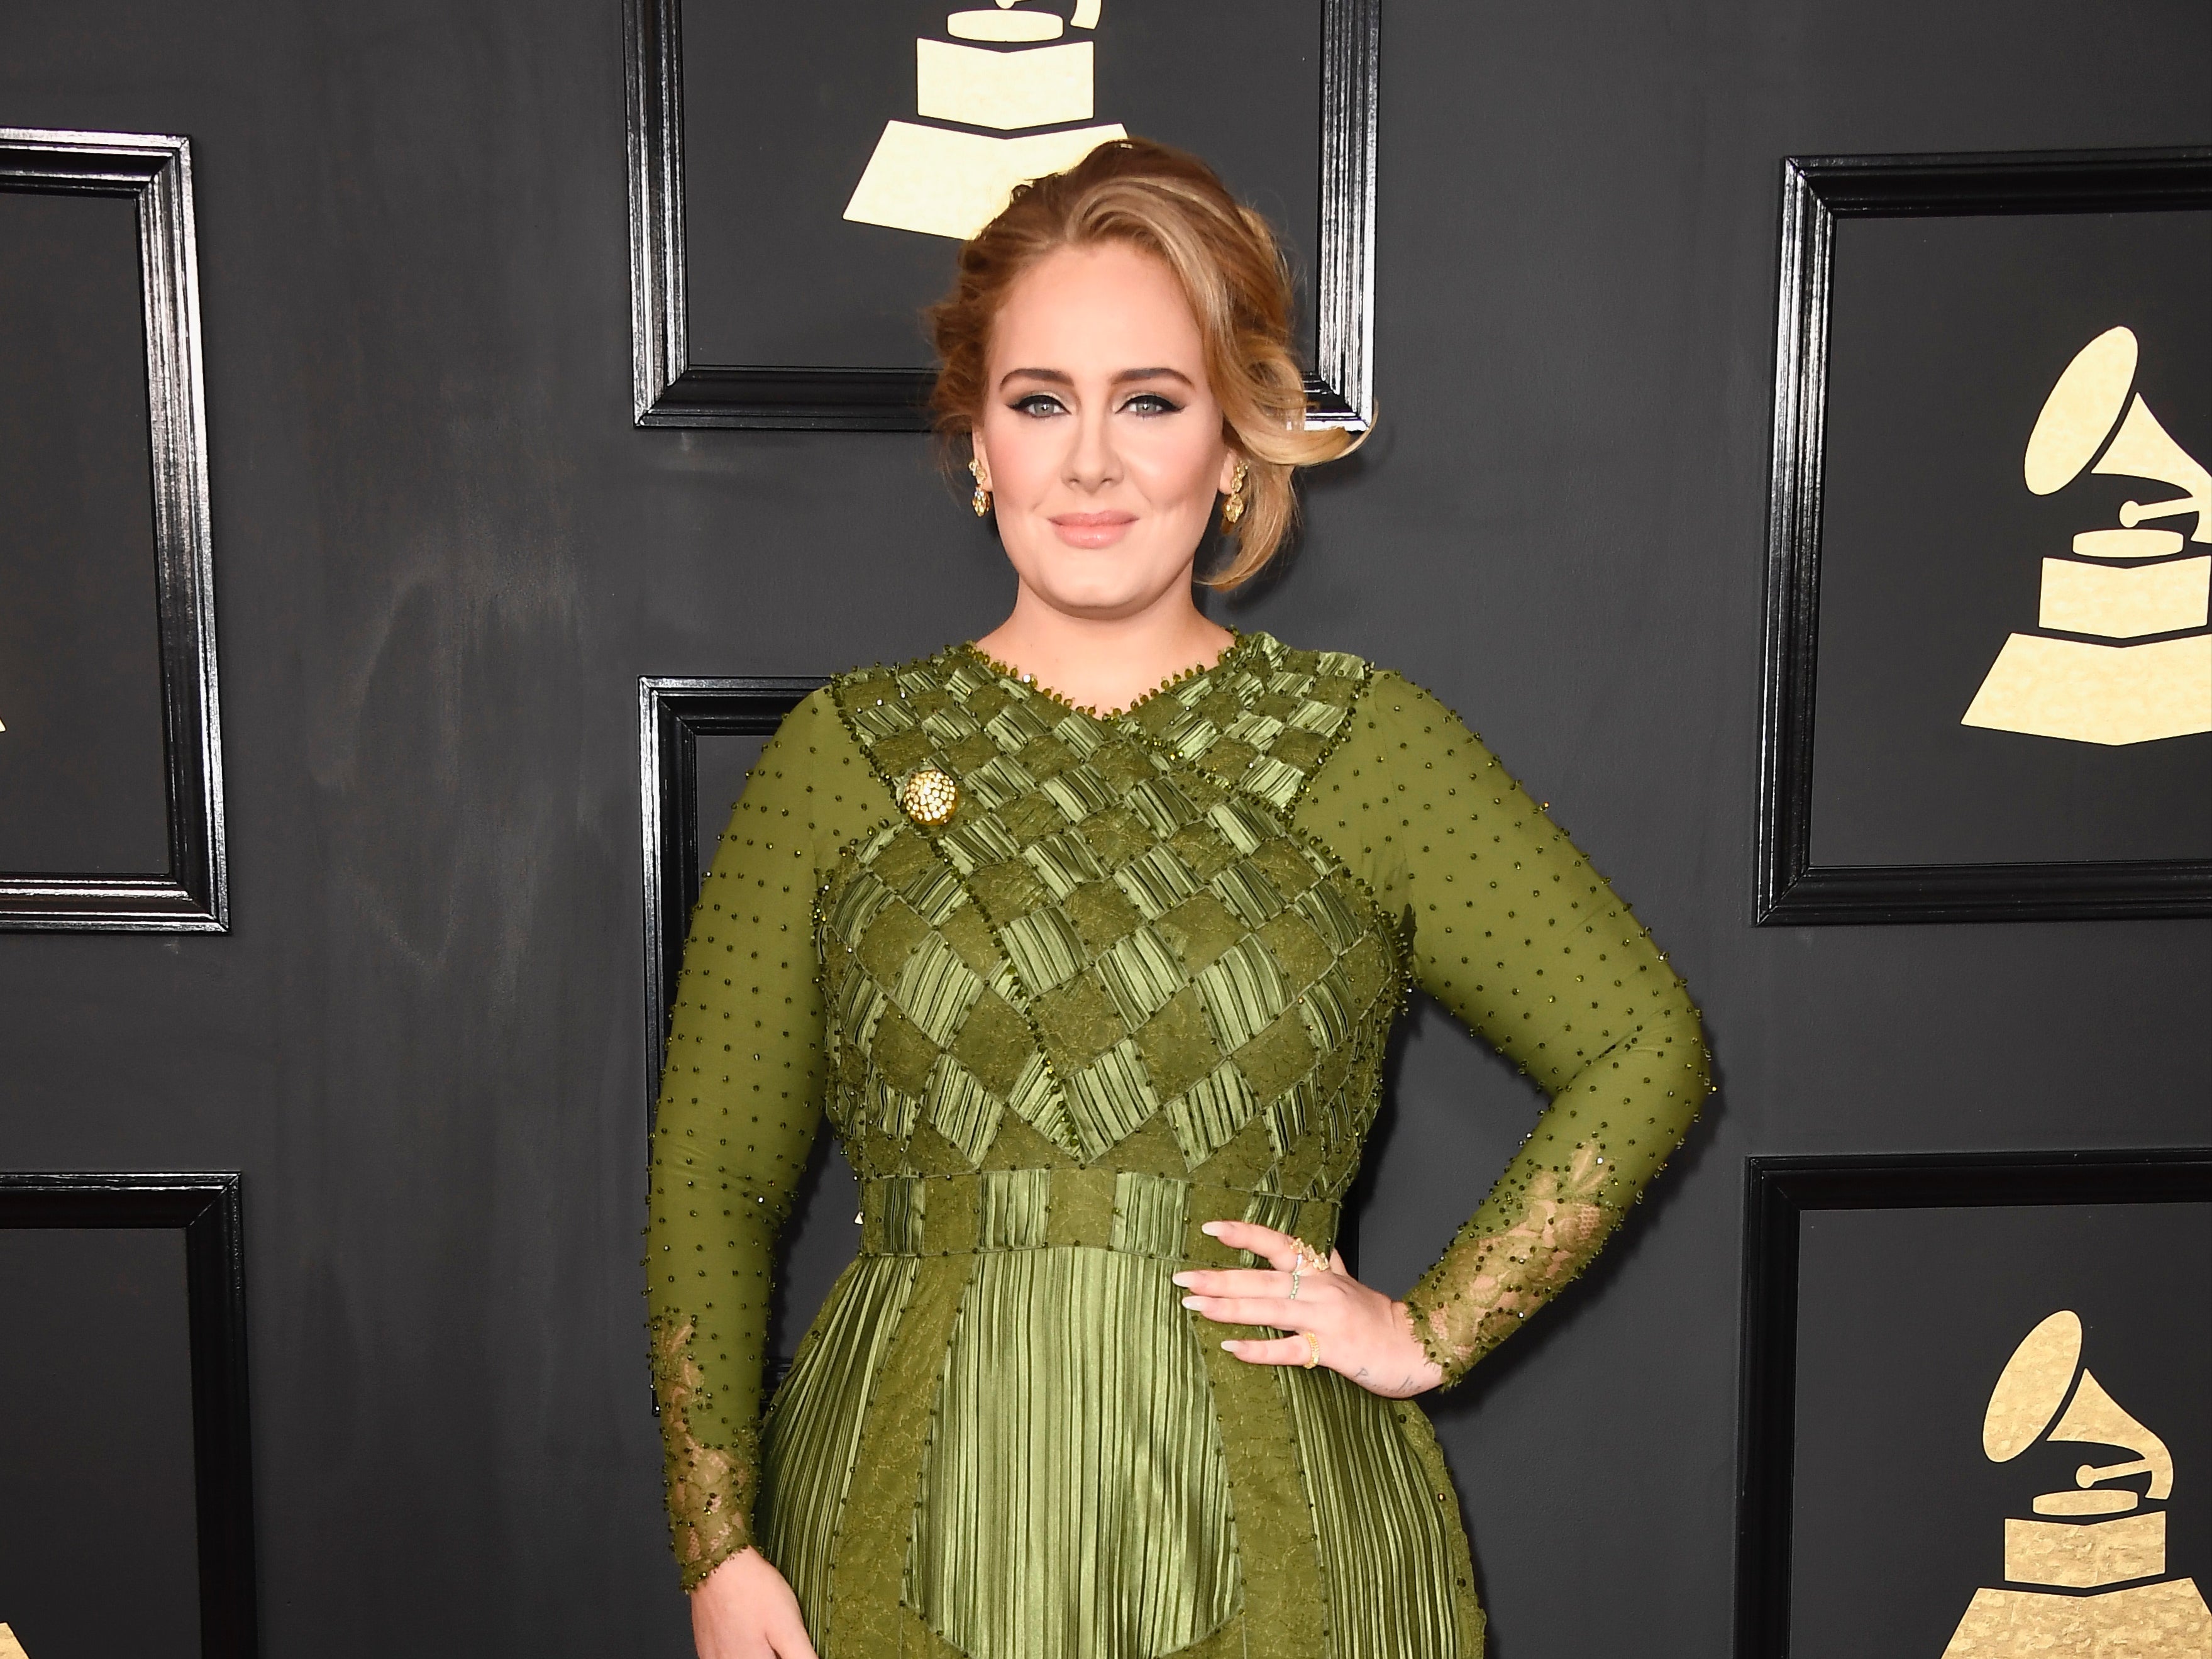 Adele opens up about weight loss and ‘brutal conversations’ being had